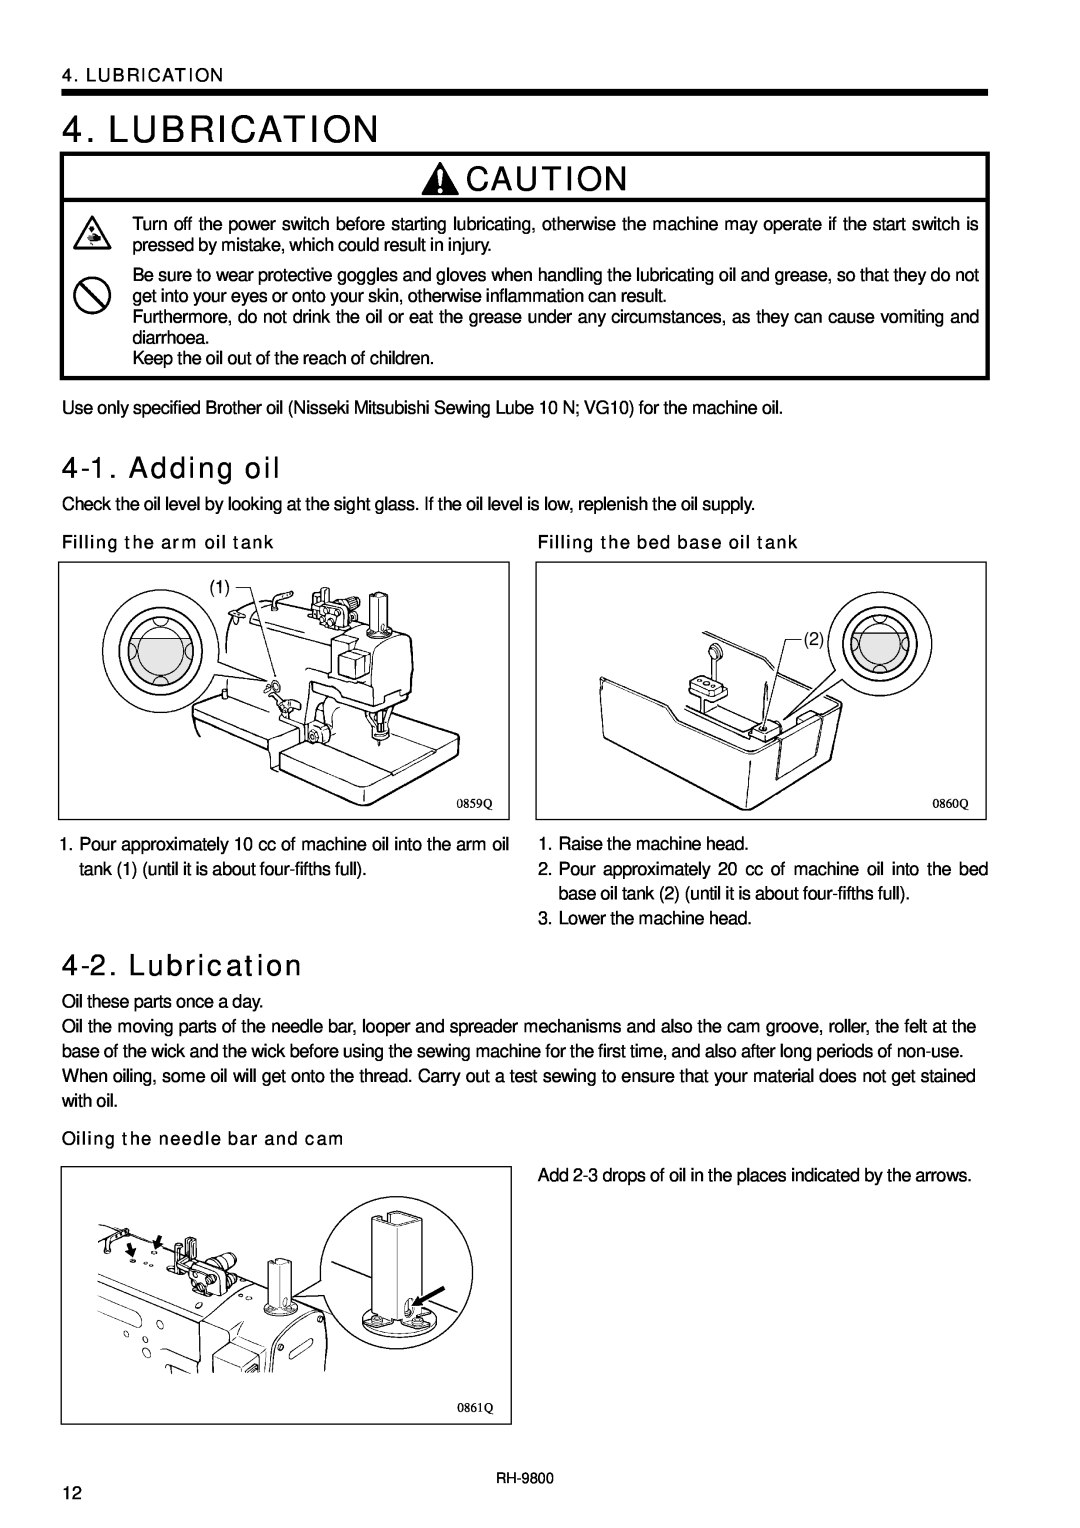 Brother DH4-B980 instruction manual Lubrication, Adding oil, Filling the arm oil tank, Oiling the needle bar and cam 